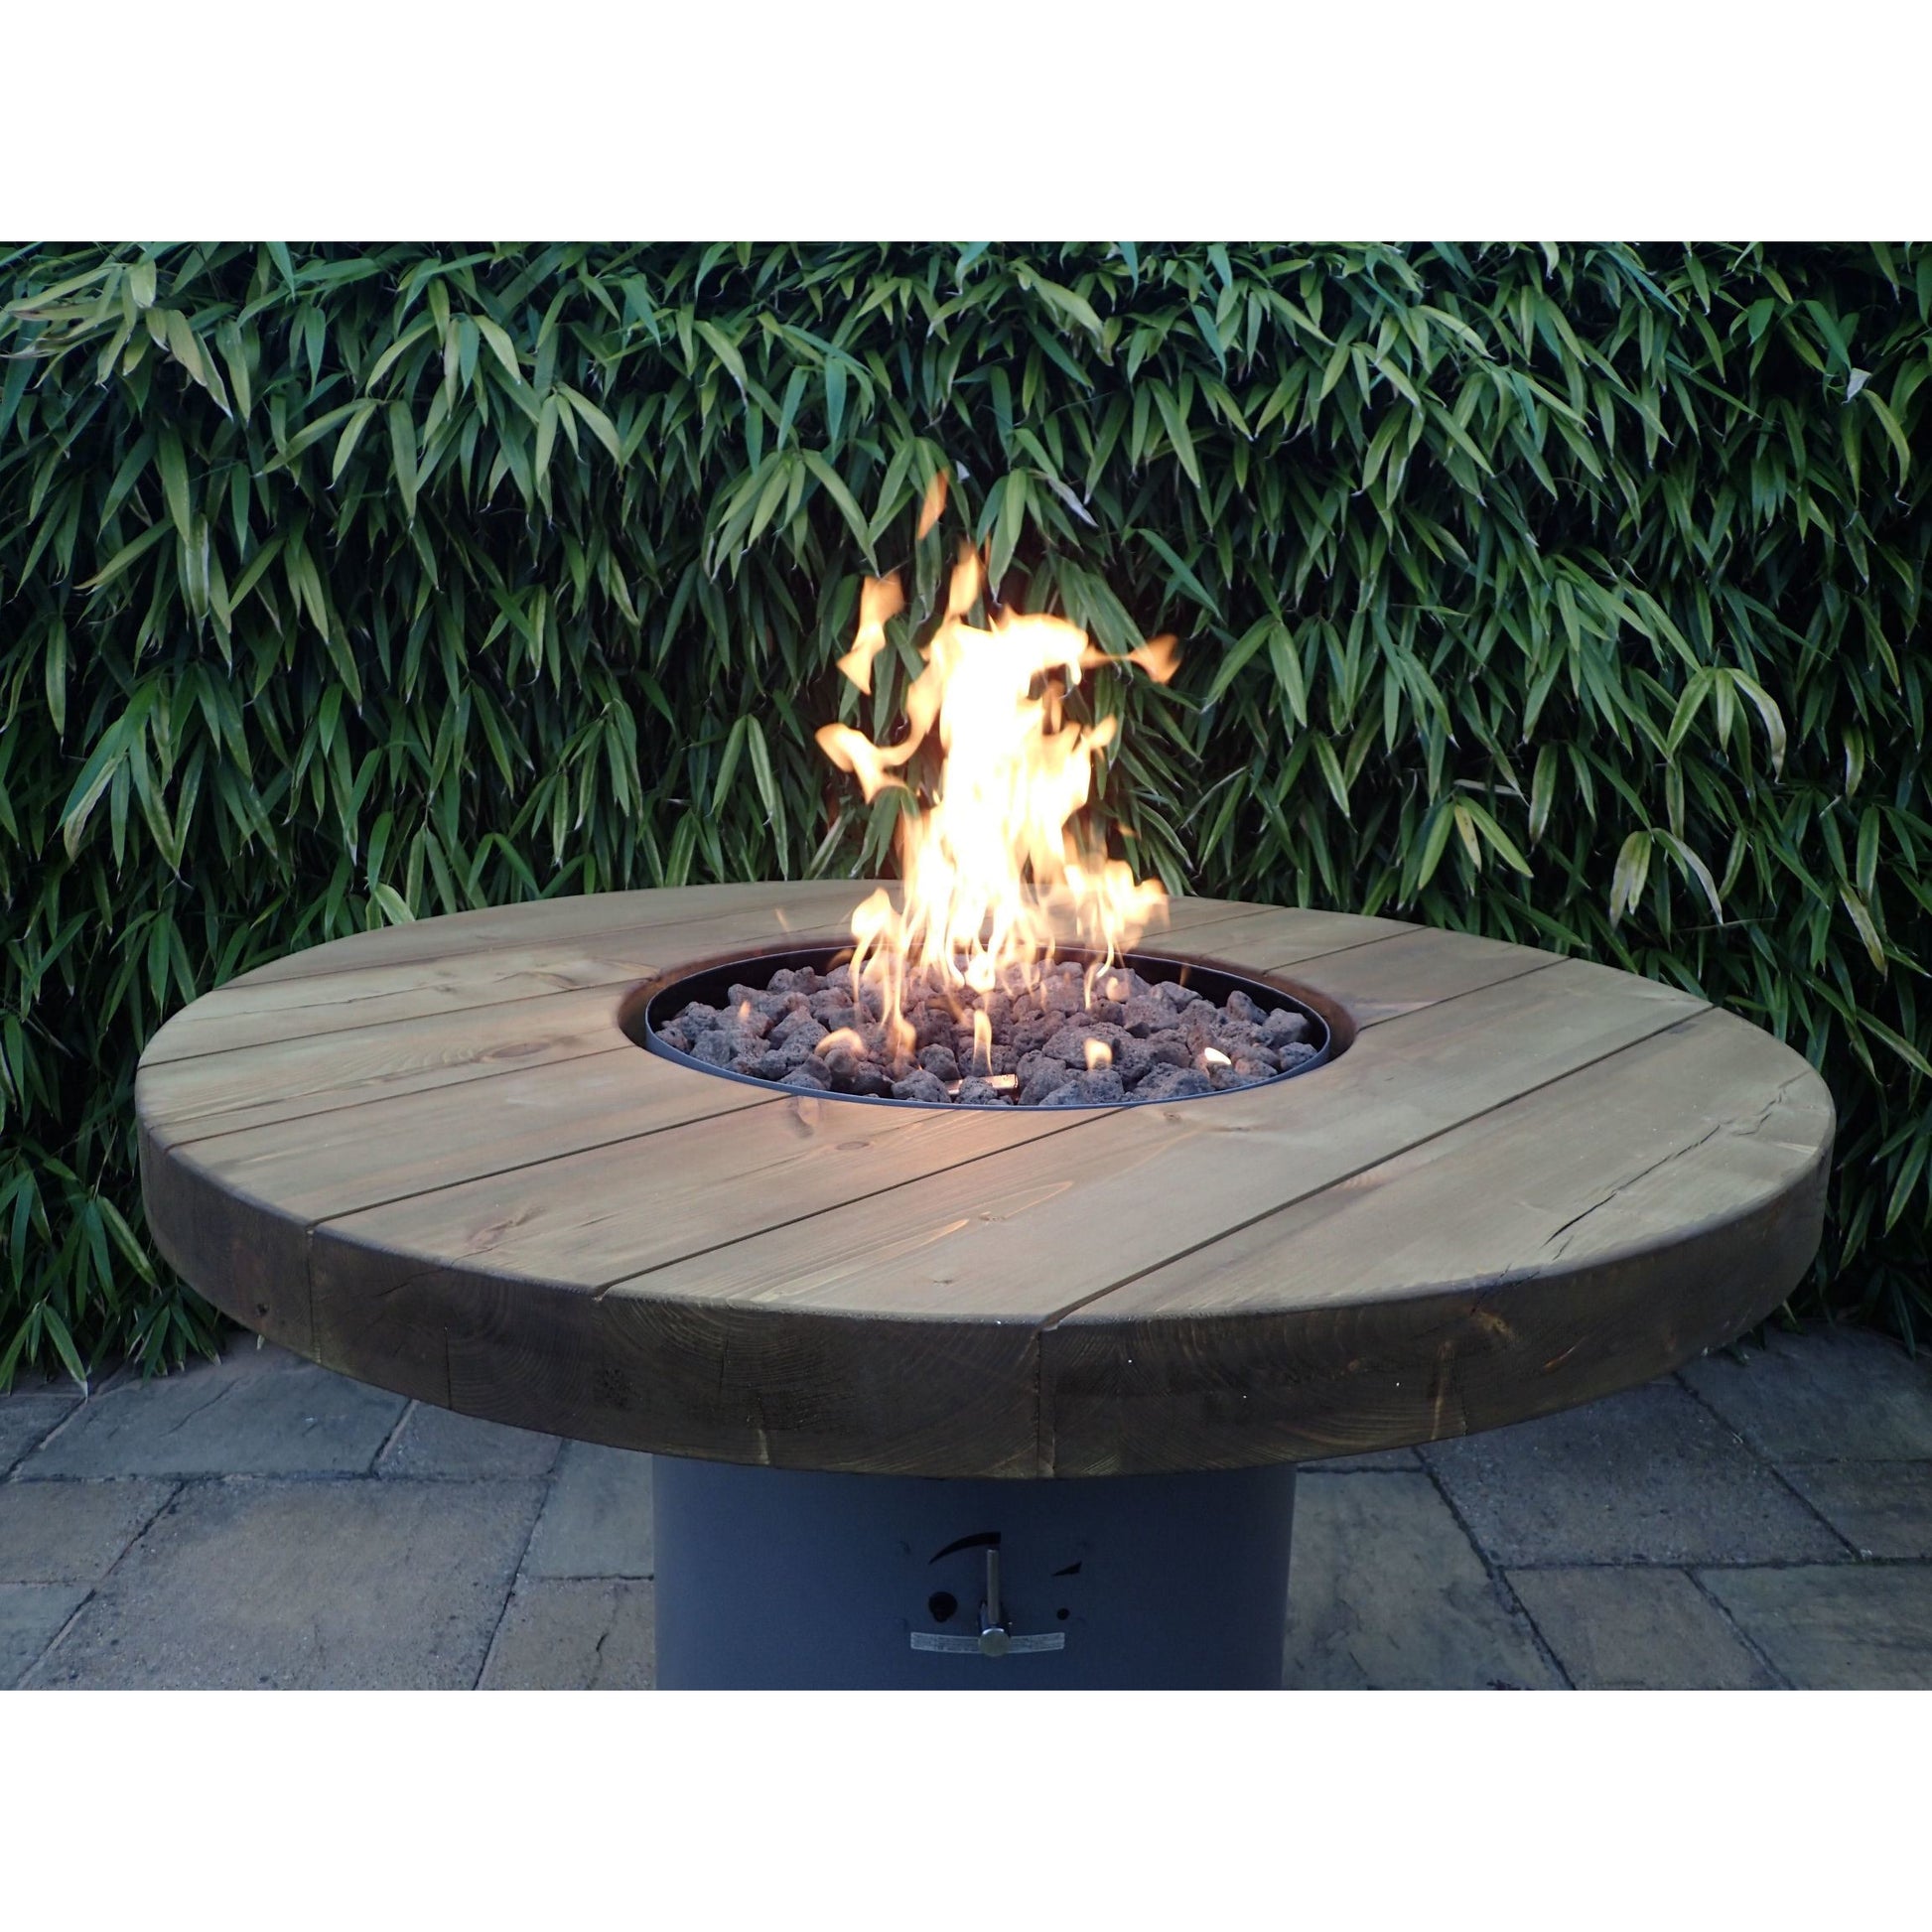 Brightstar Fires - Gas Fire Pit High Table - Luxury Fire Pits - PadioLiving - Brightstar Fires - Gas Fire Pit High Table - Luxury Fire Pits - Fire Pit Table - PadioLiving